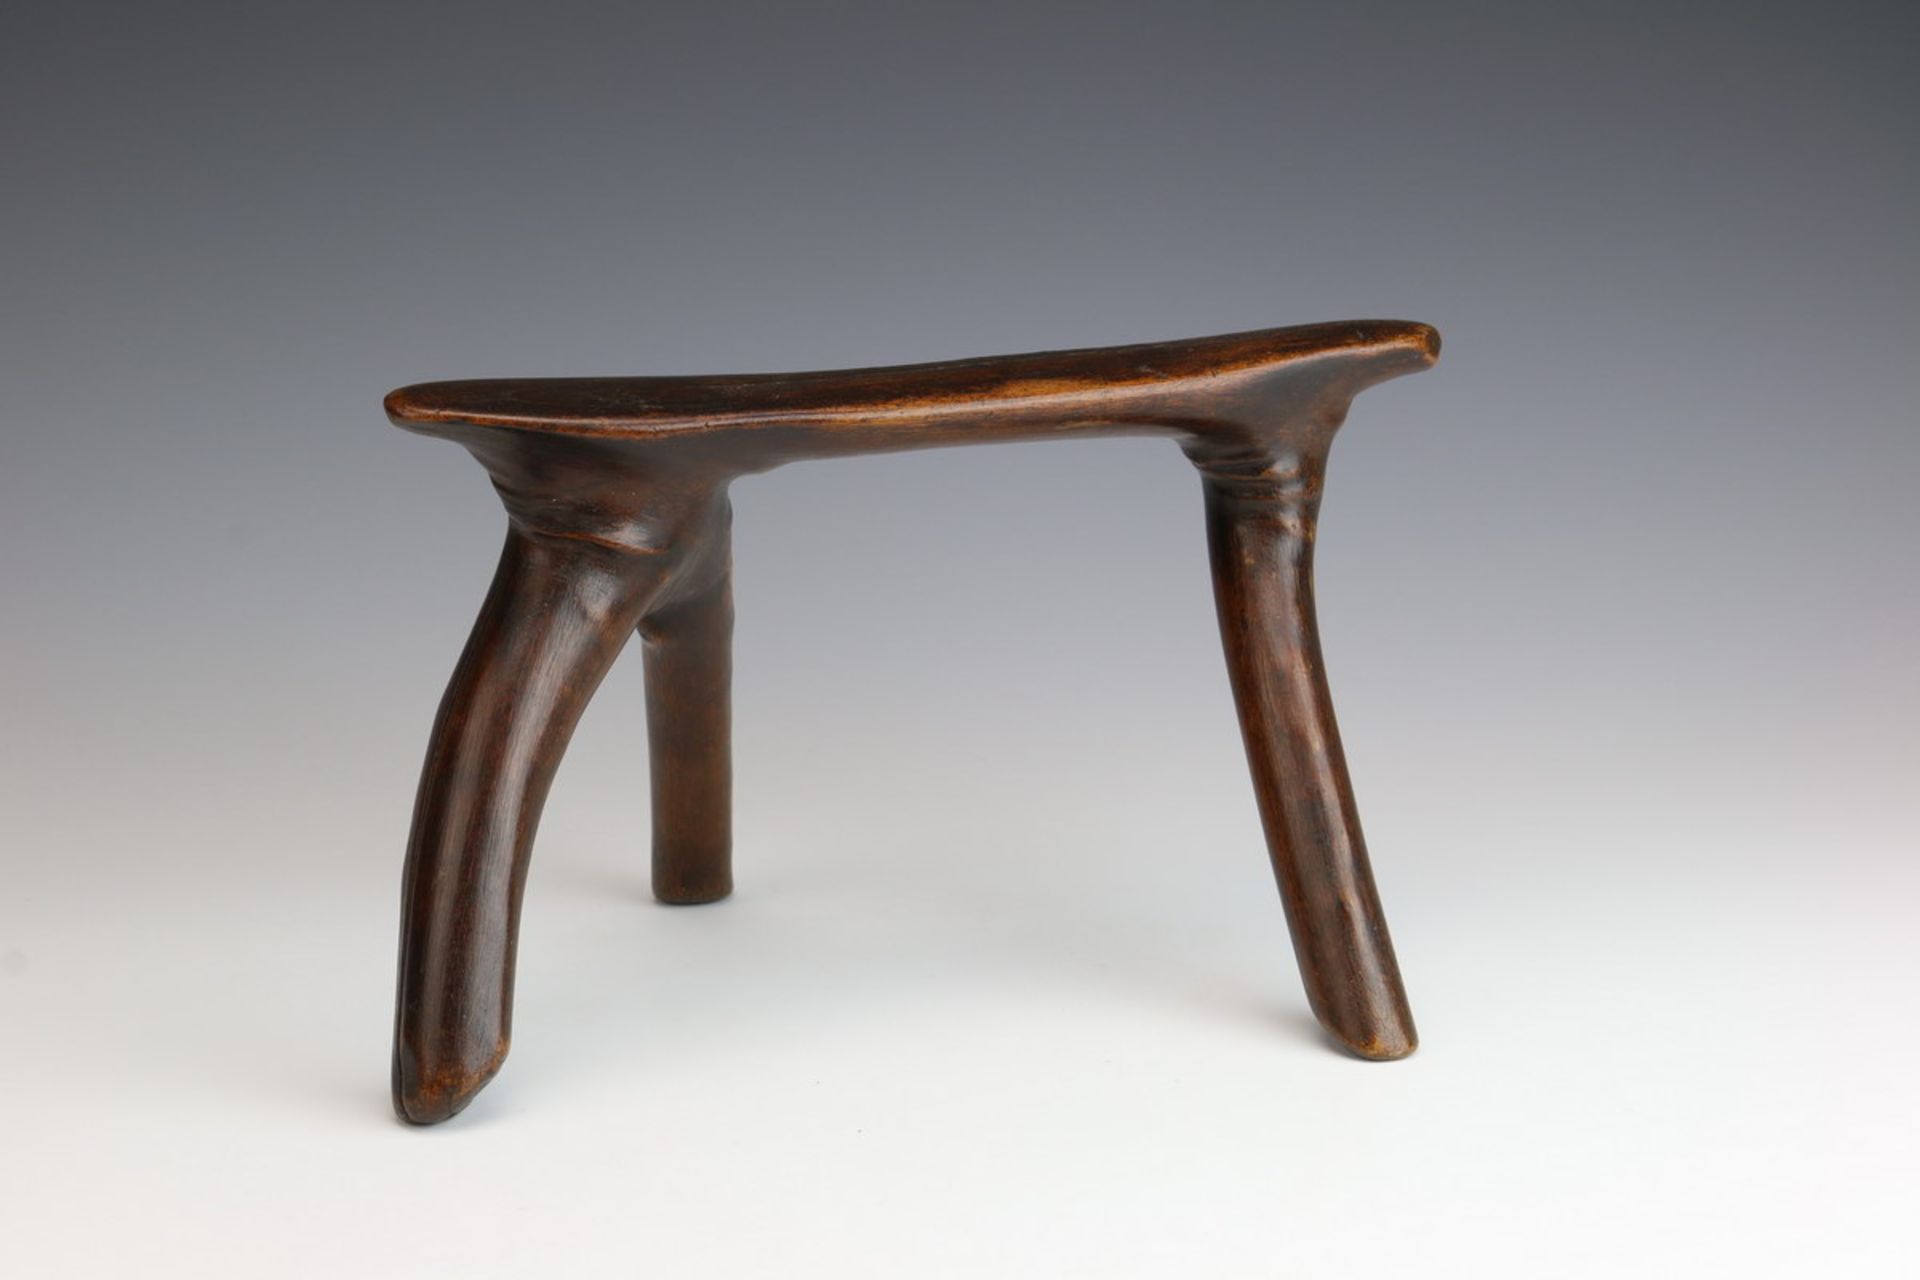 South Sudan, Dinka, wooden neckrest,with three curved legs. With glossy dark brown patina. Private